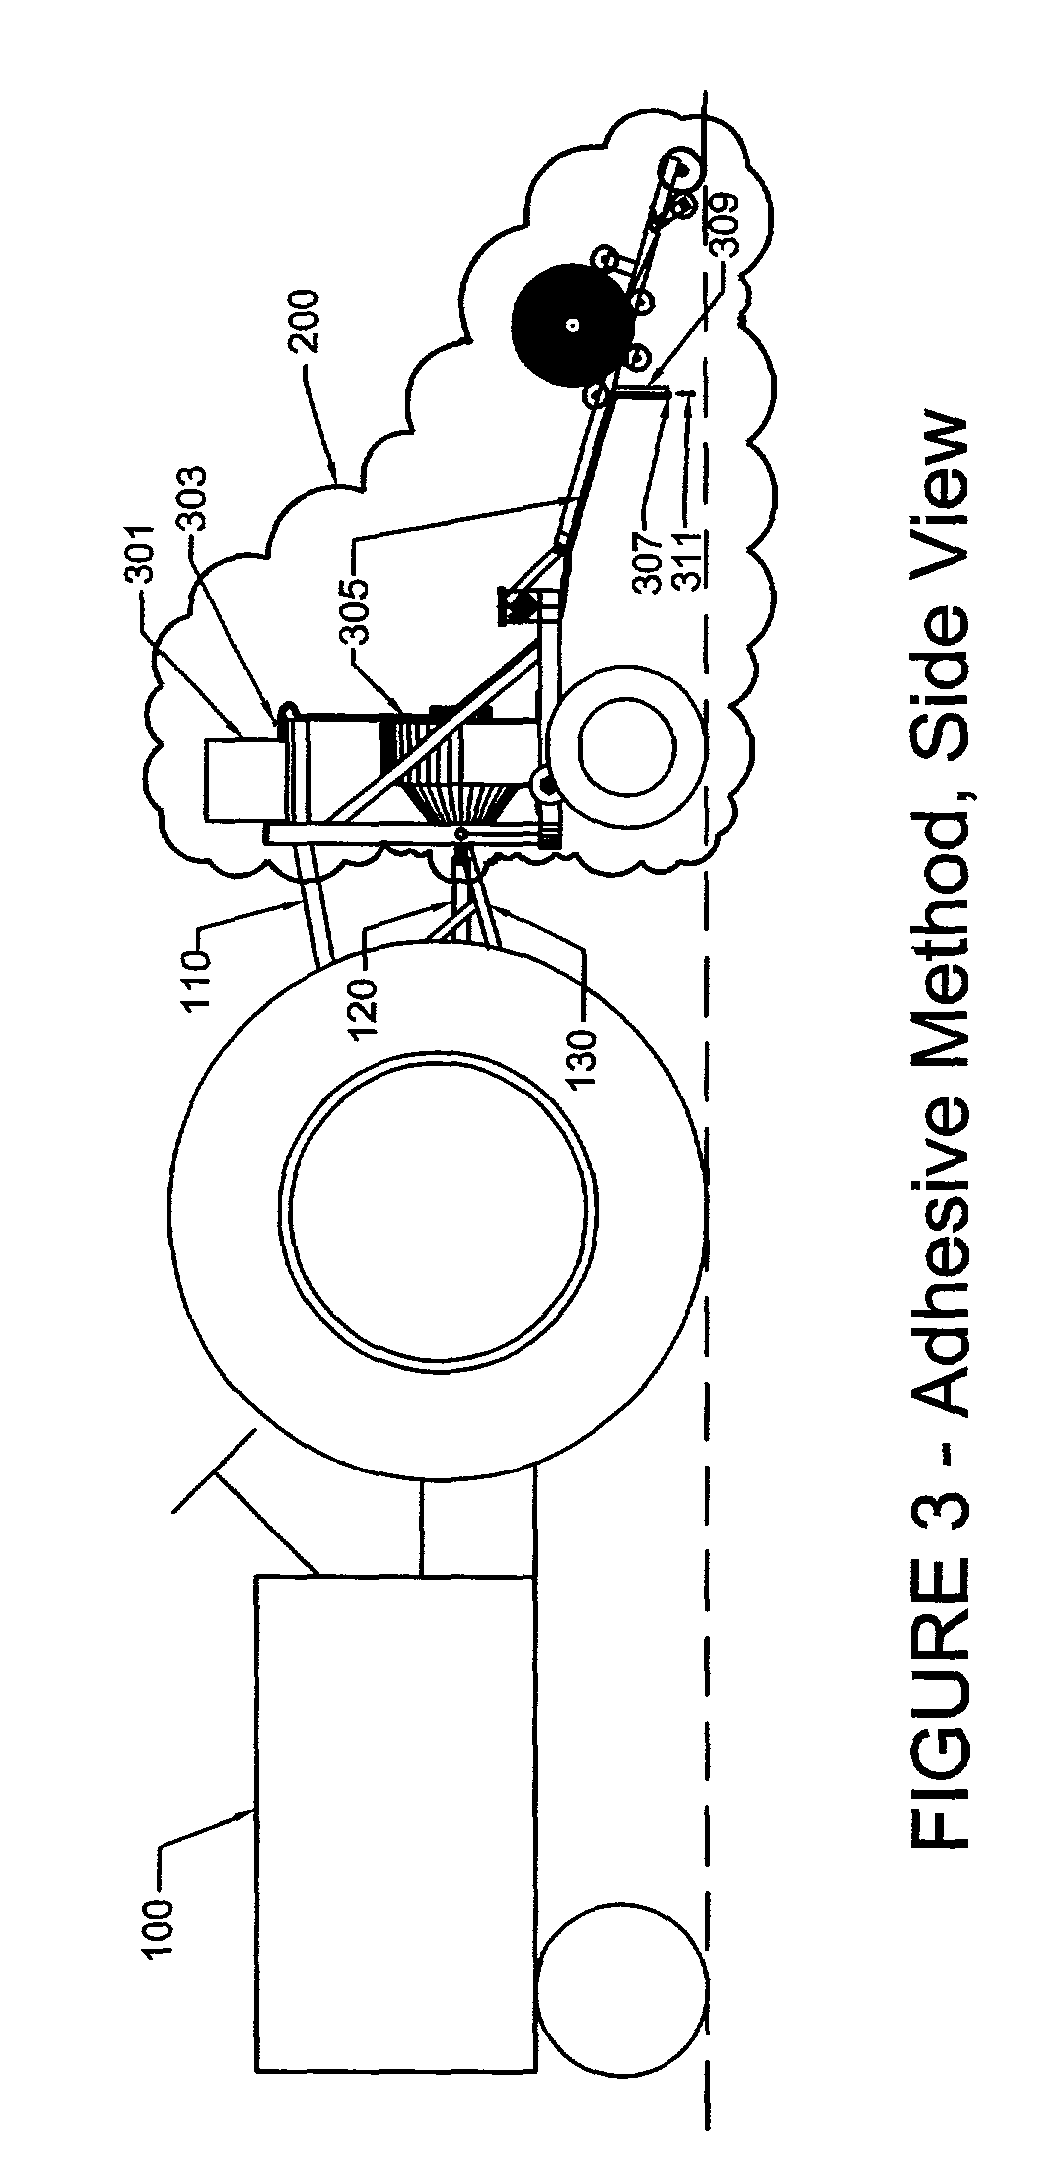 Method and machine for changing agricultural mulch